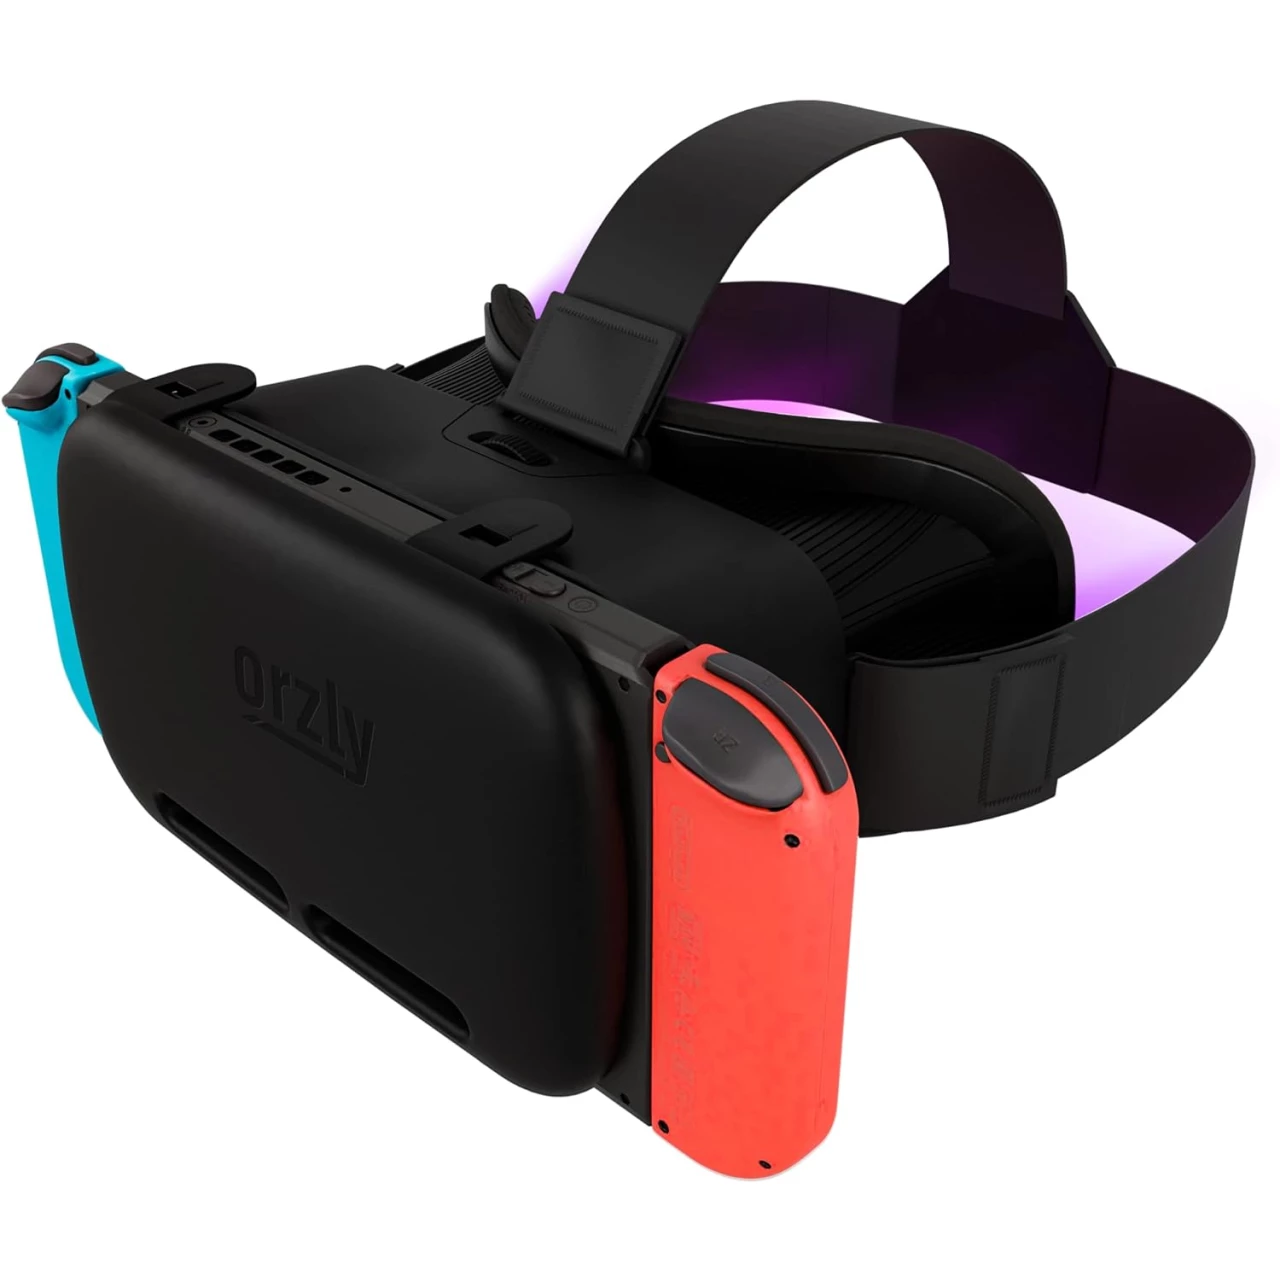 Orzly VR Headset